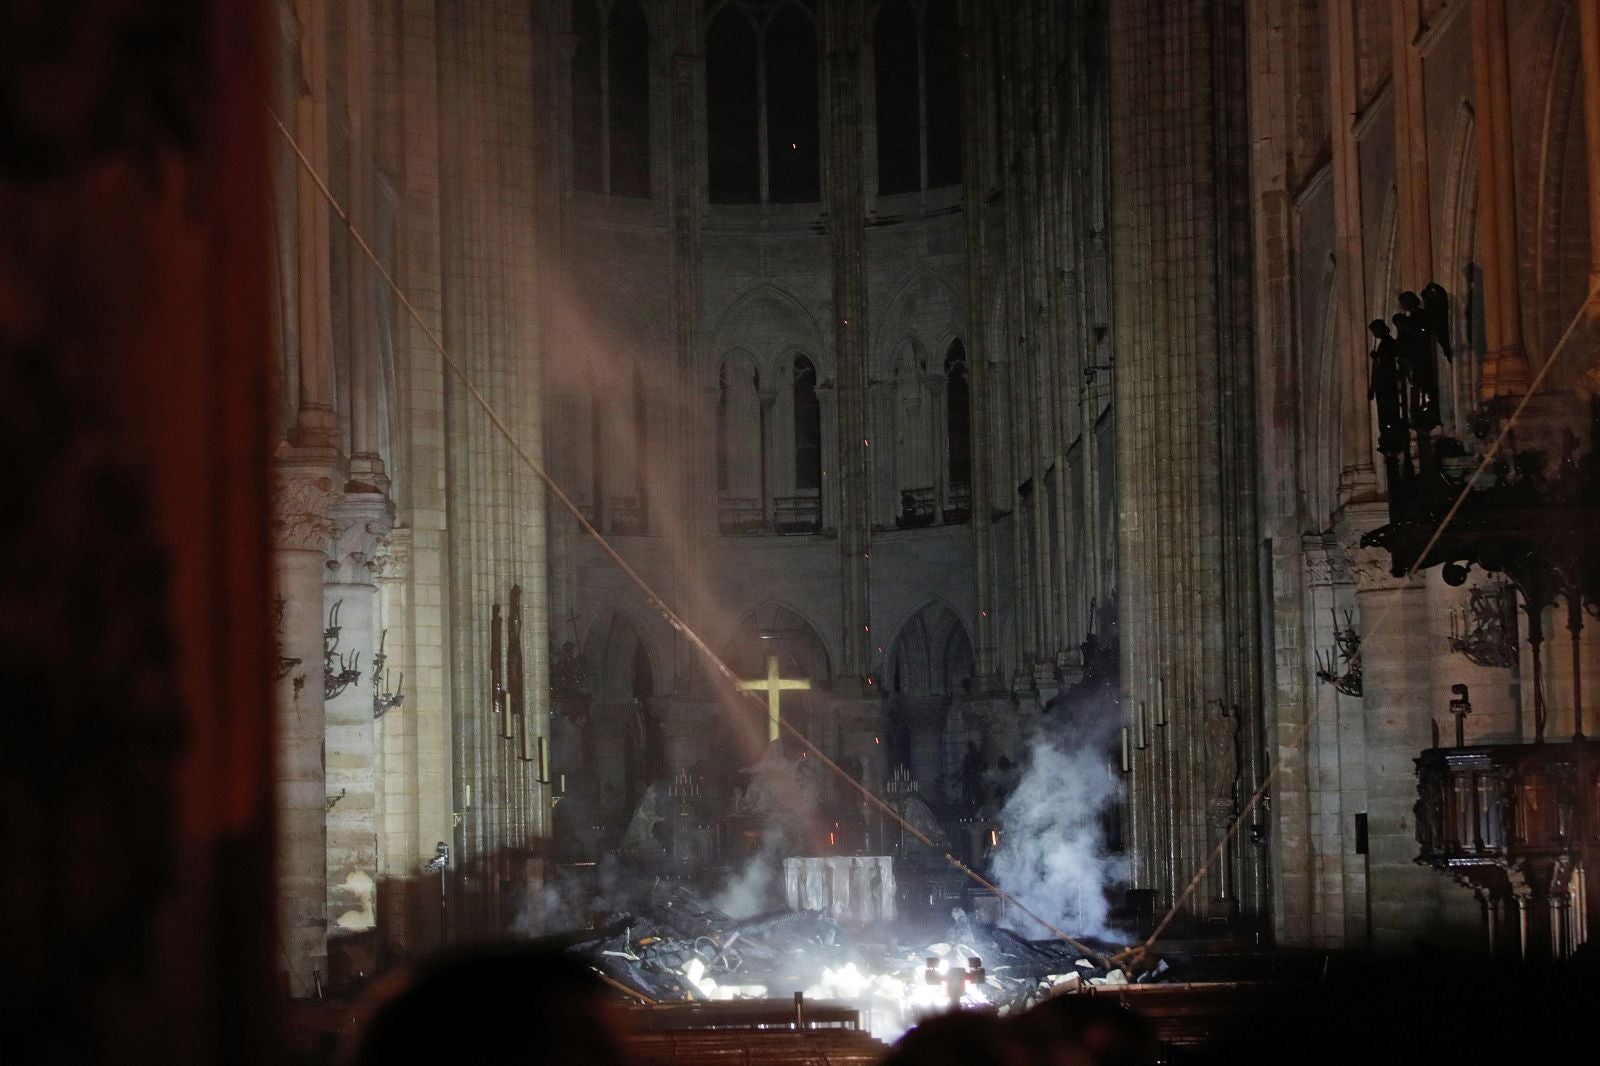 Newly Released Photos Show The Inside Of Notre Dame Cathedral After The Fire - World Of Buzz